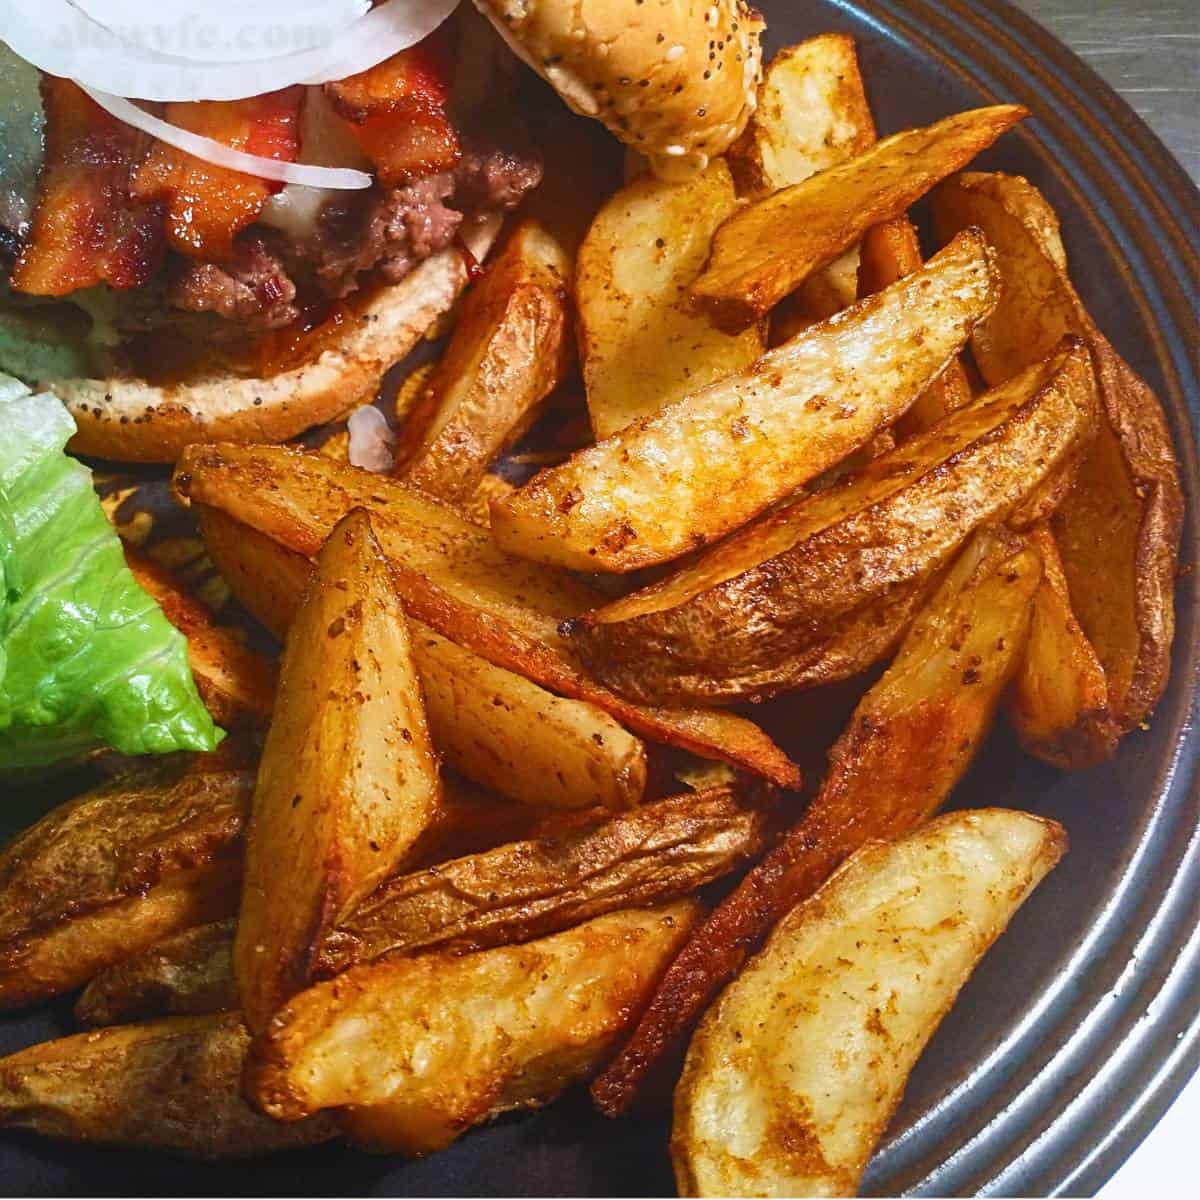 a plate overflowing with cajun crispy potato wedges along with a bacon cheeseburger.